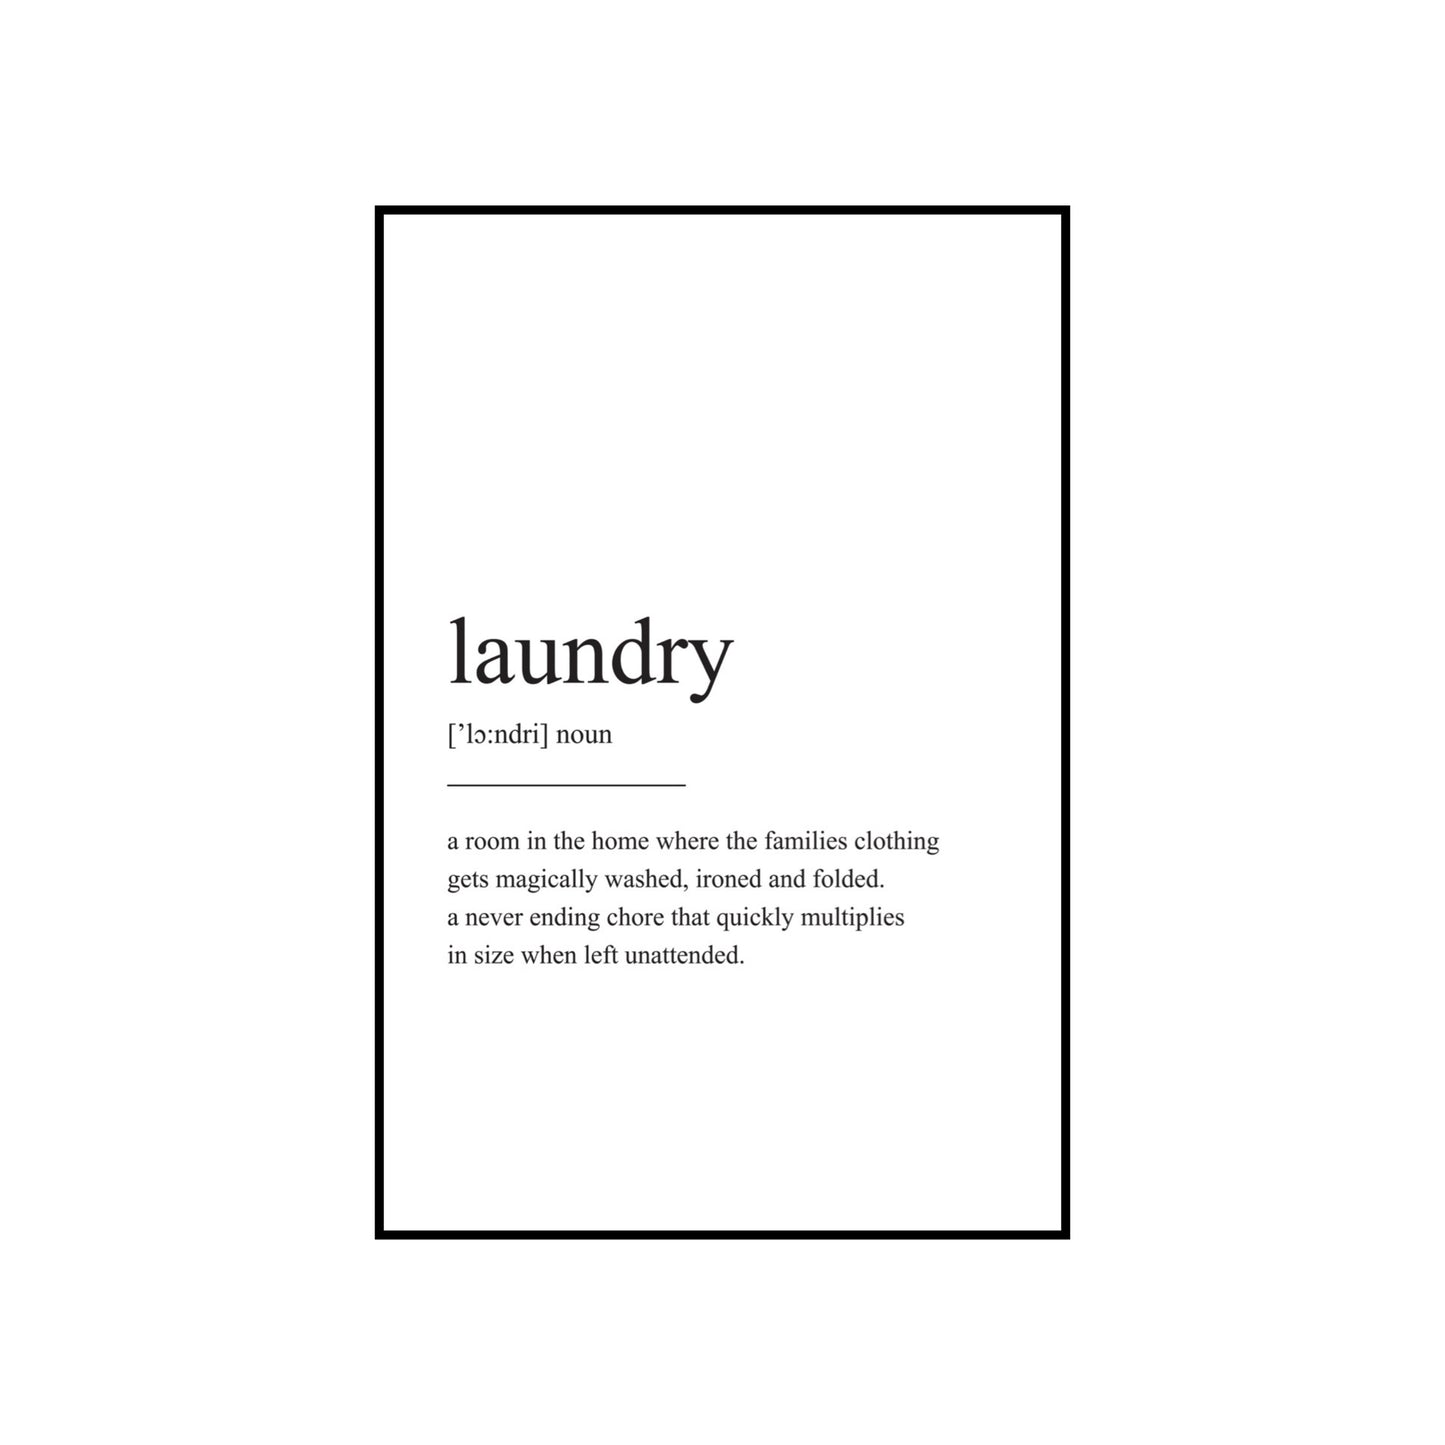 Laundry definition